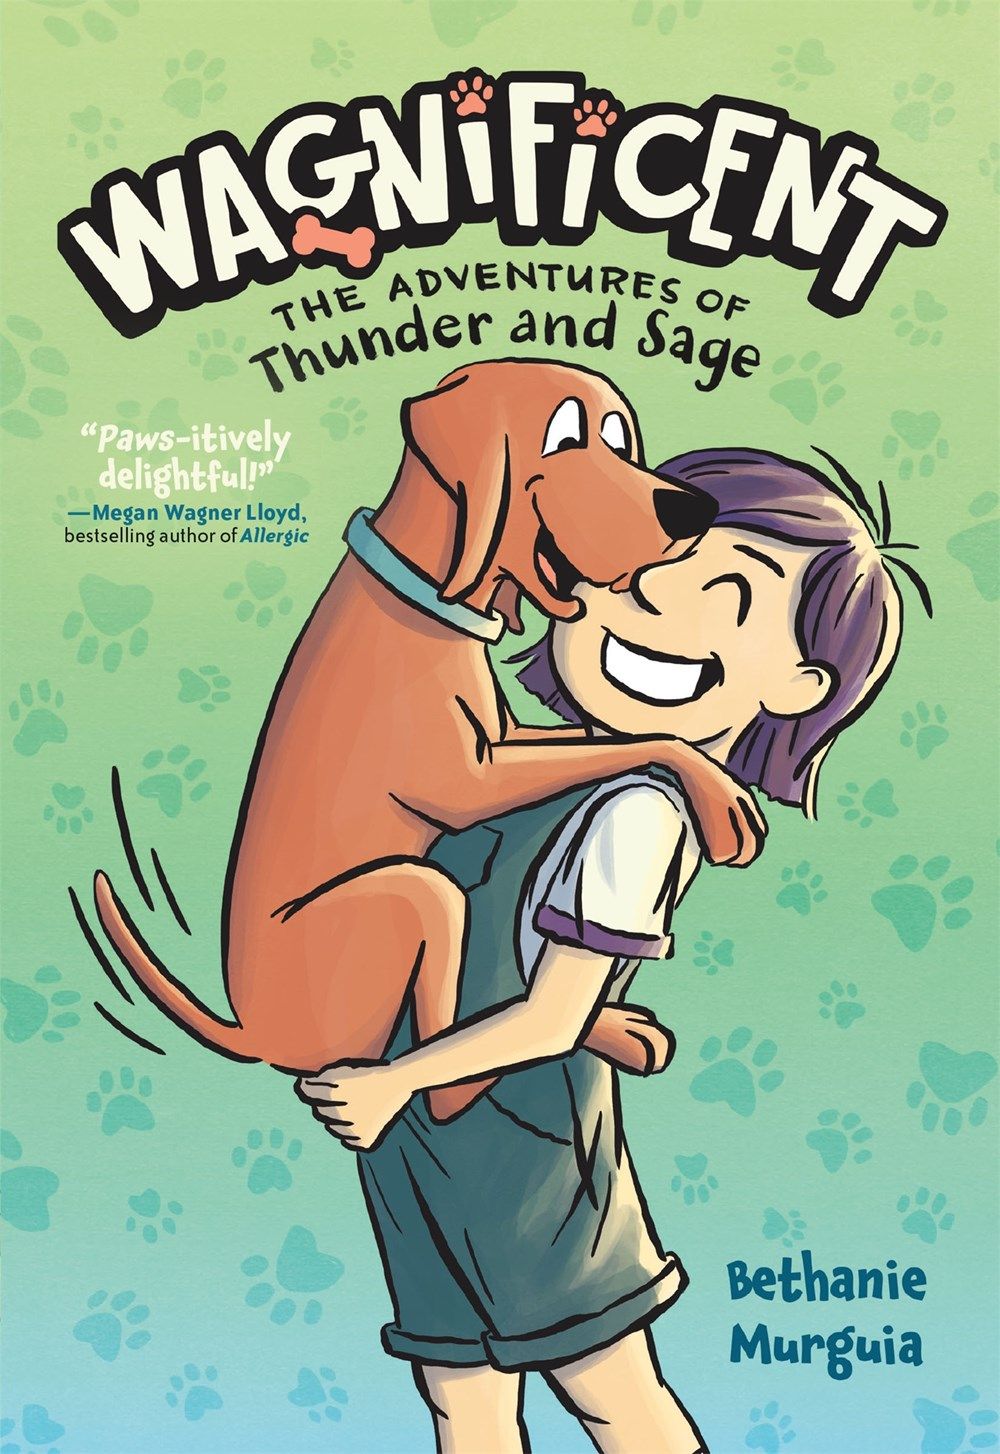 Cover of Wagnificent by Bethanie Murguia